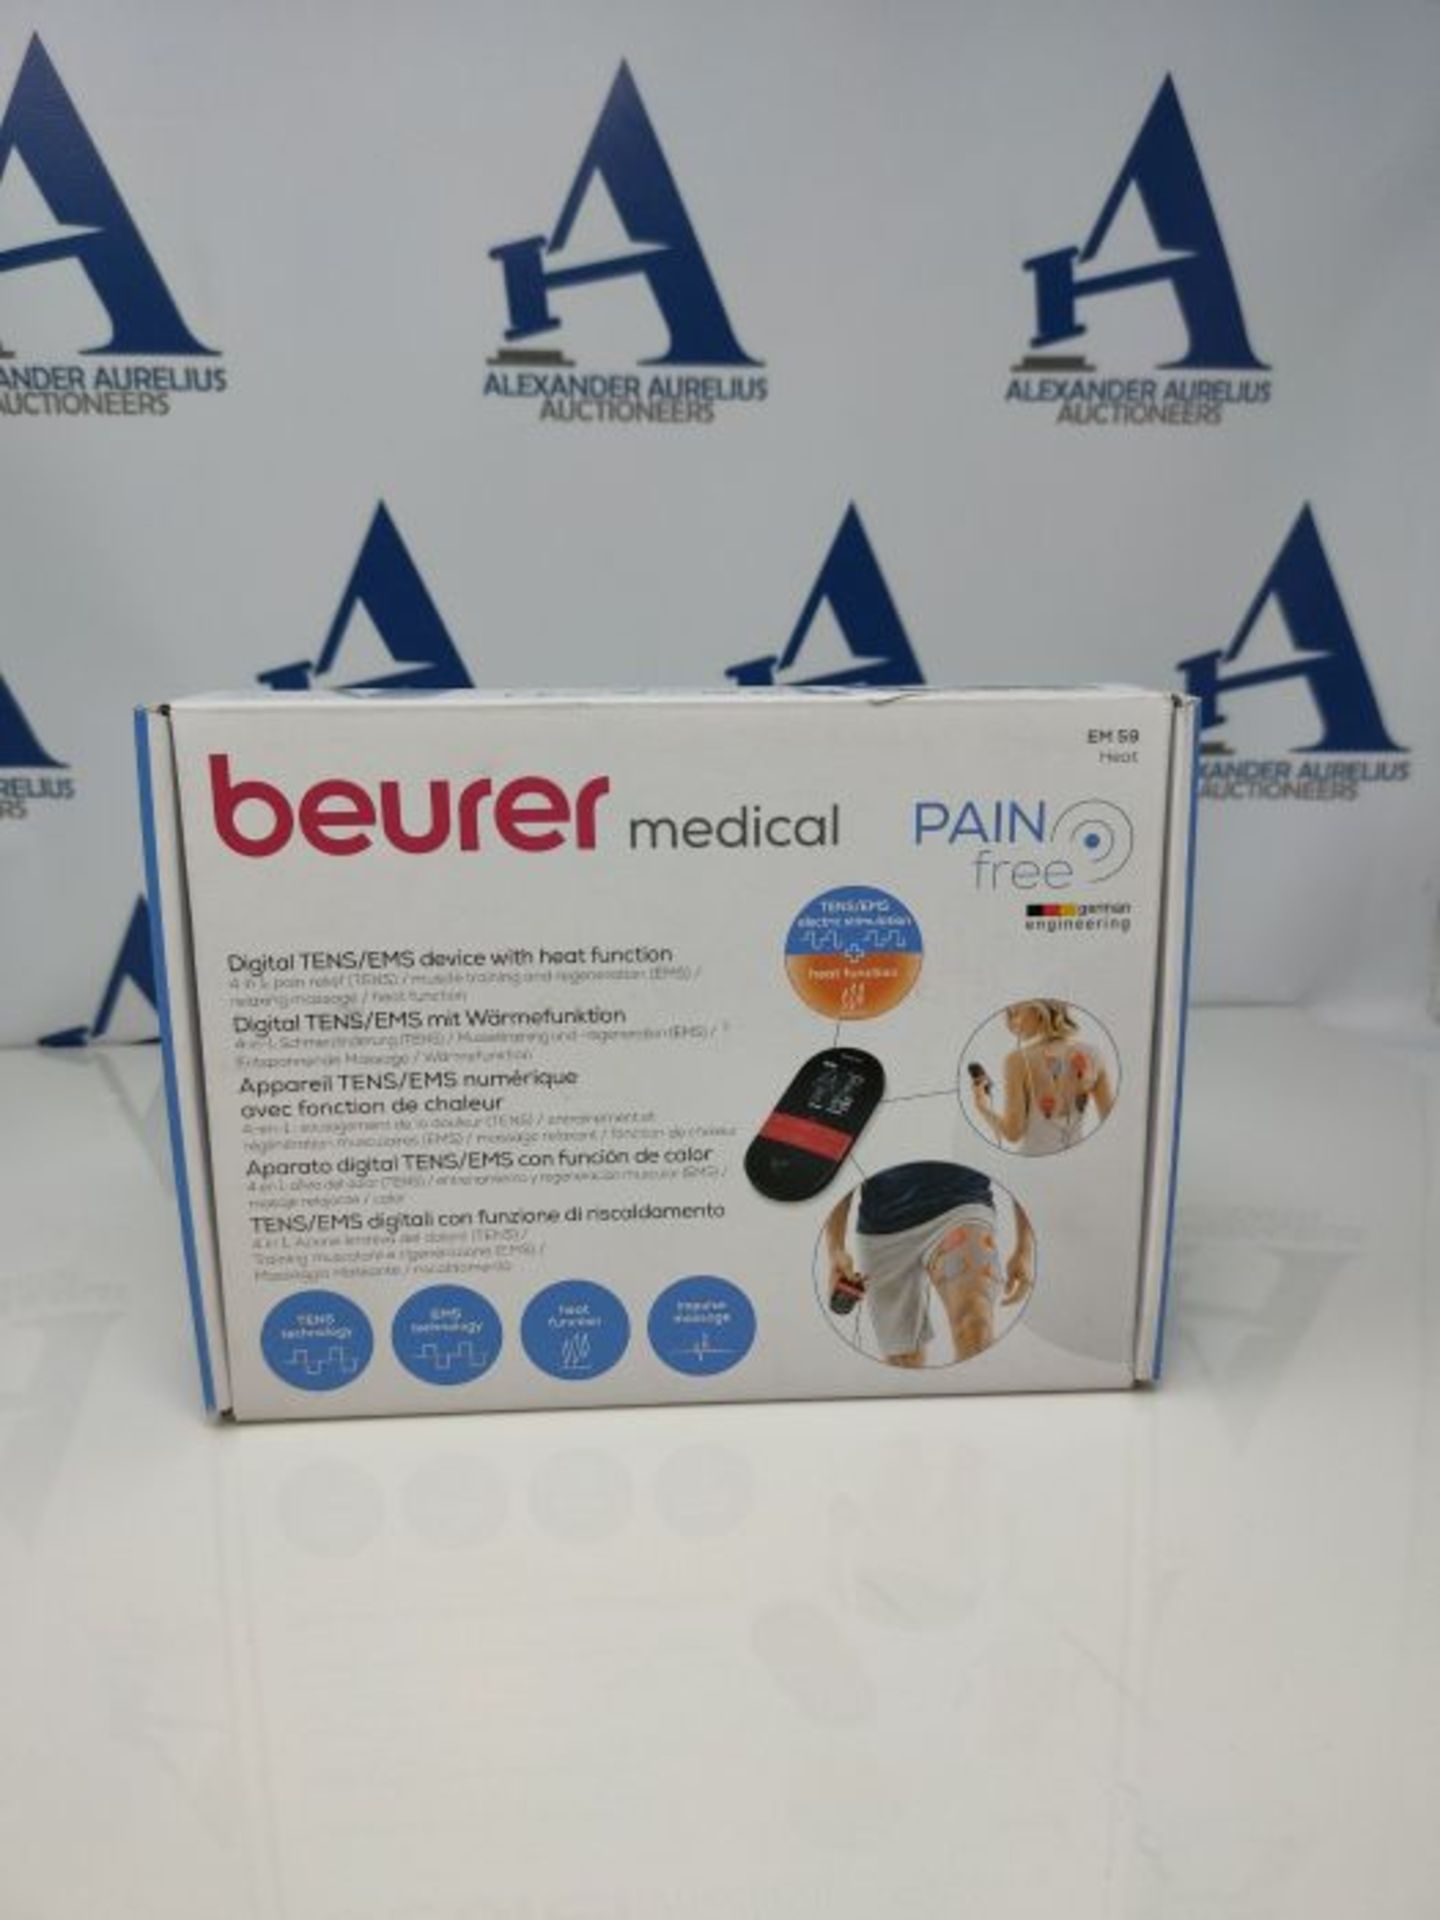 RRP £100.00 Beurer EM59 Digital TENS/EMS Device with Heat | 4-in-1 stimulation device for pain the - Image 2 of 3